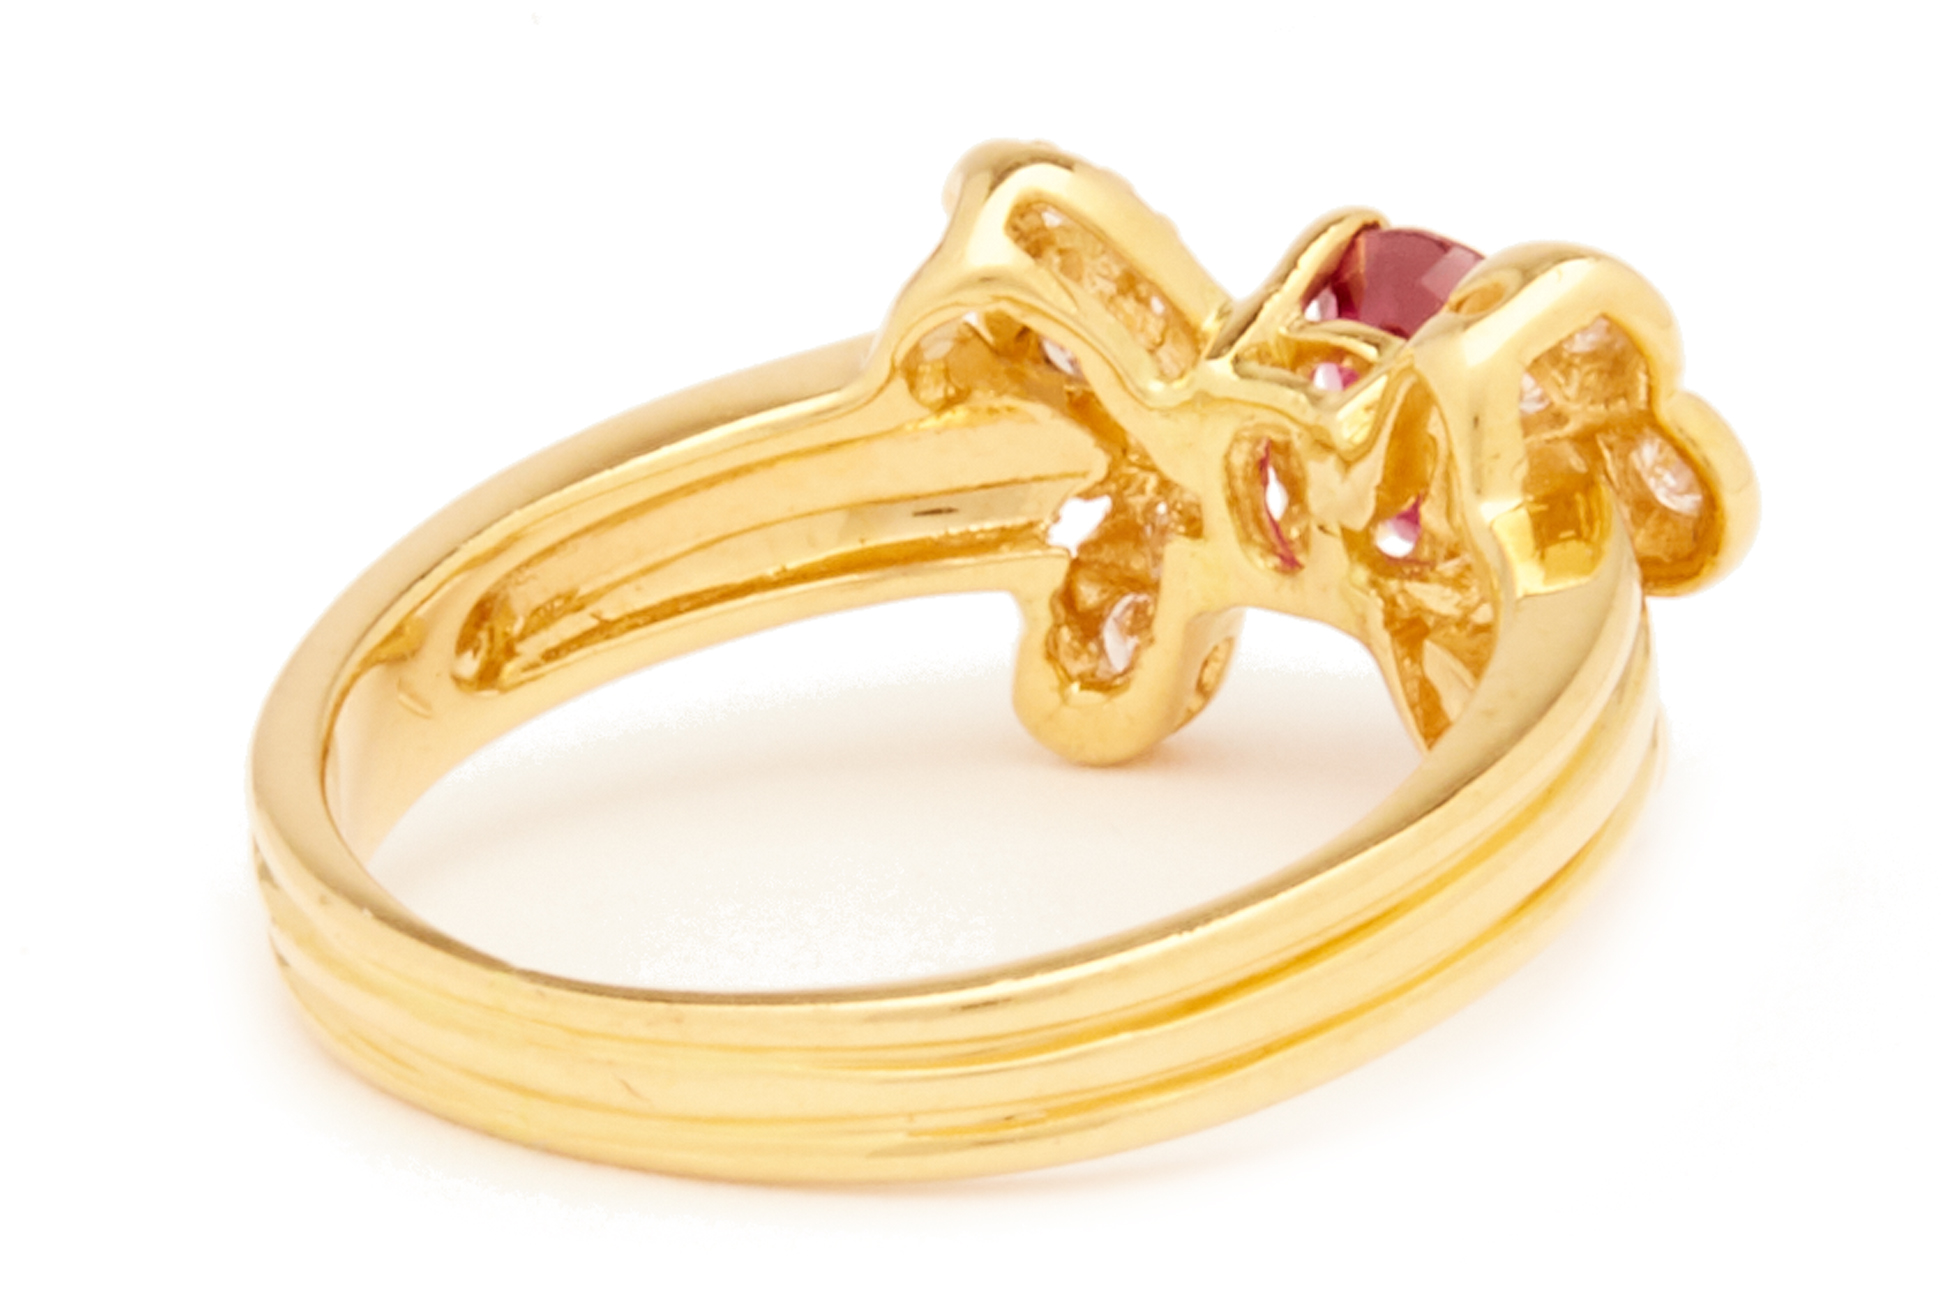 A RUBY AND DIAMOND RING - Image 3 of 3